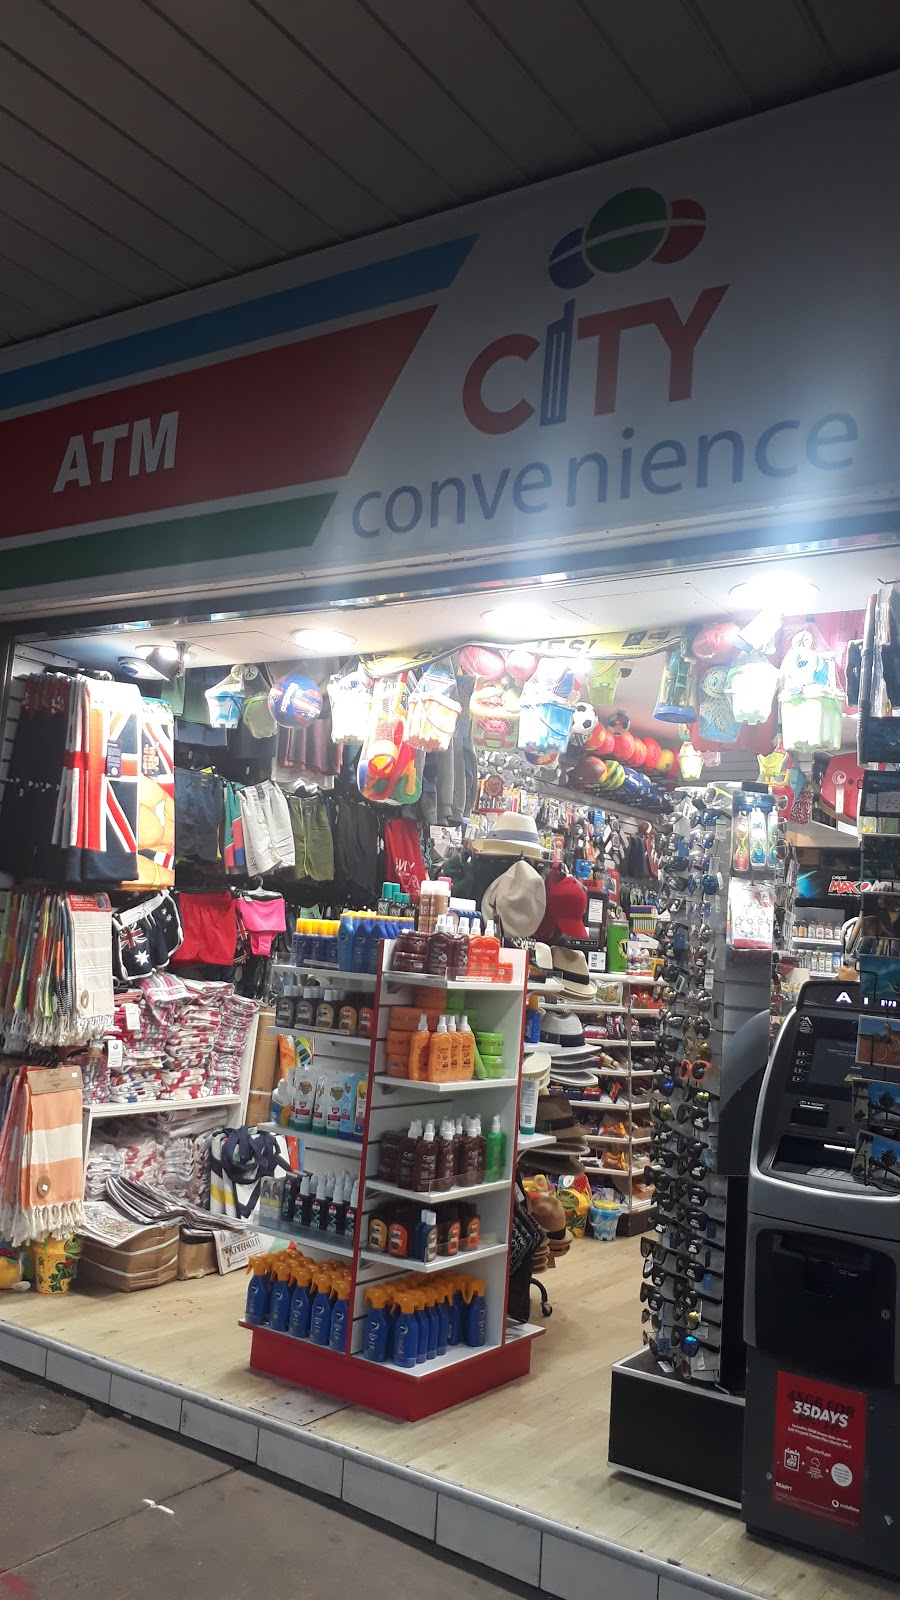 City Convenience | convenience store | 270 Coogee Bay Rd, Coogee NSW 2034, Australia | 0405033087 OR +61 405 033 087